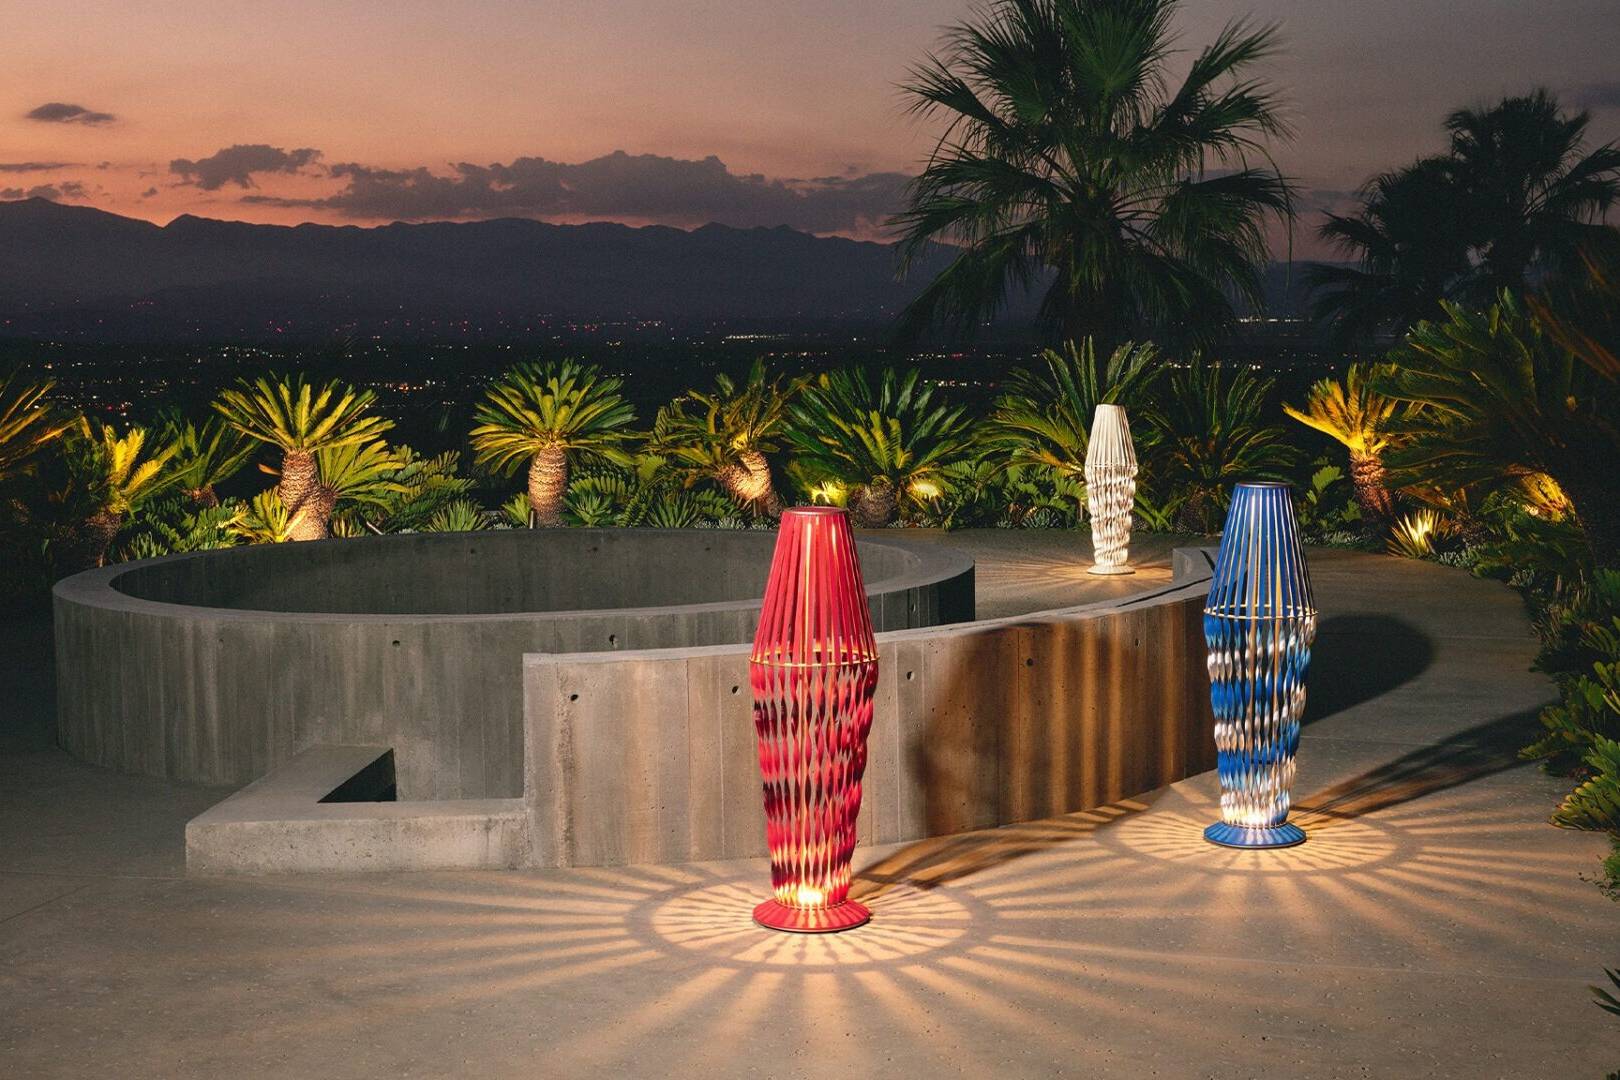 Three colorful glass vases are lit up at dusk.